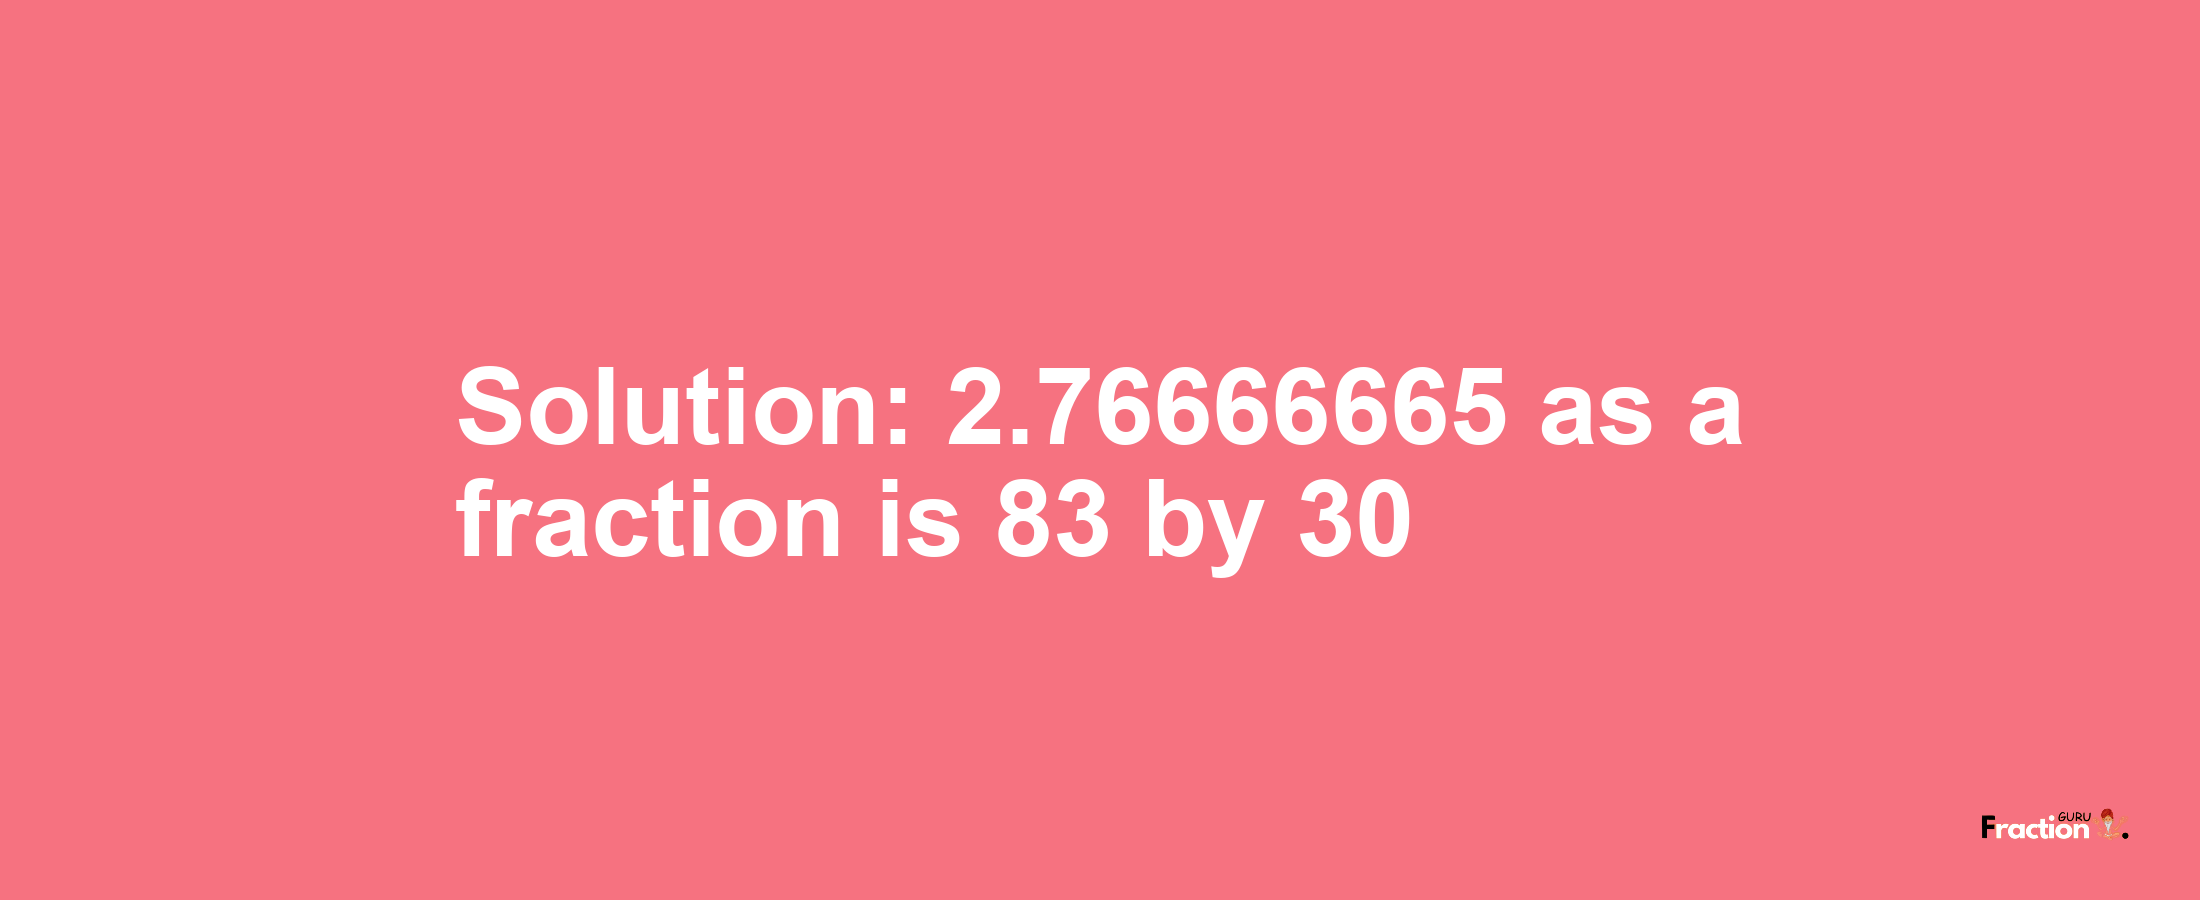 Solution:2.76666665 as a fraction is 83/30